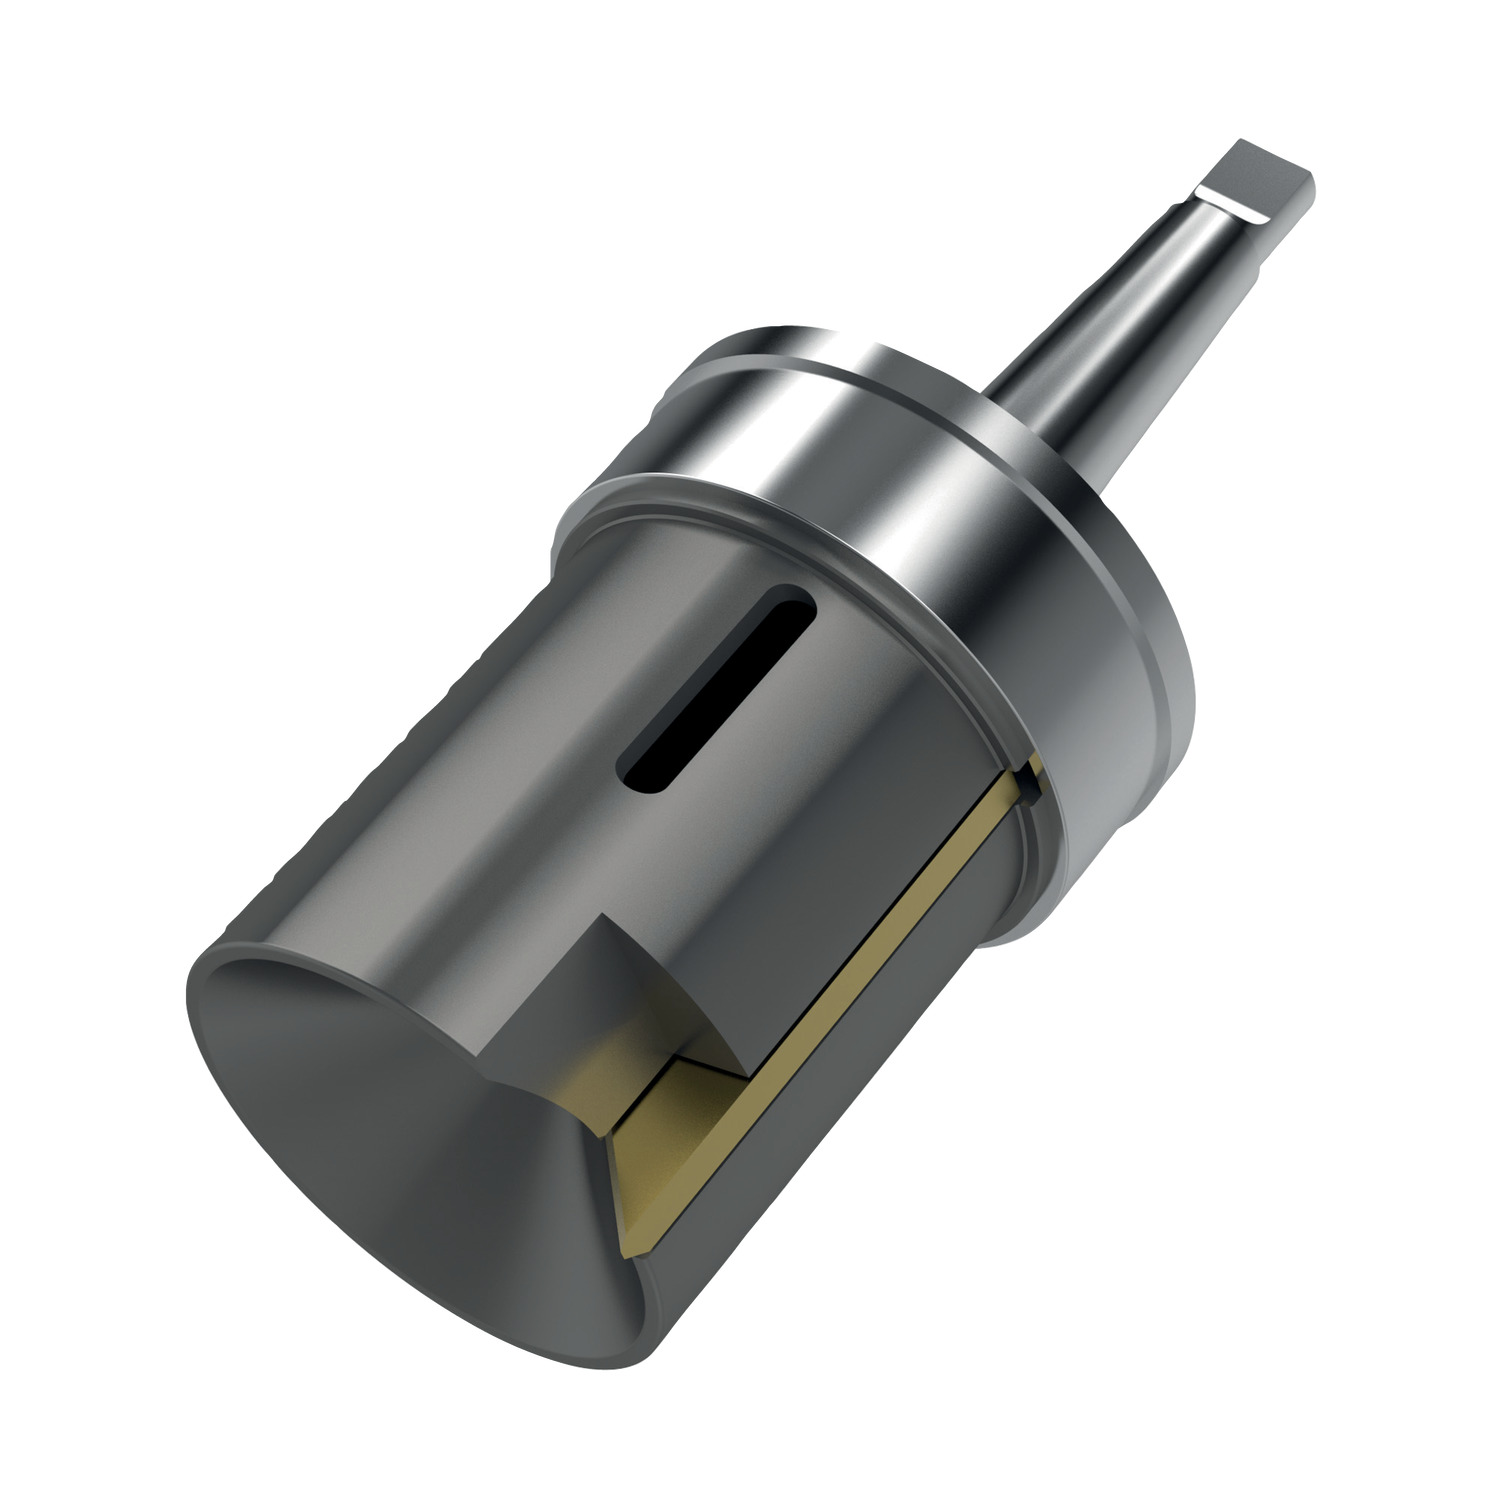 Outer Chamfering Tools Acheive high quality concentric chamfering quickly and easily, without the risk of damage/cutting into the work piece.